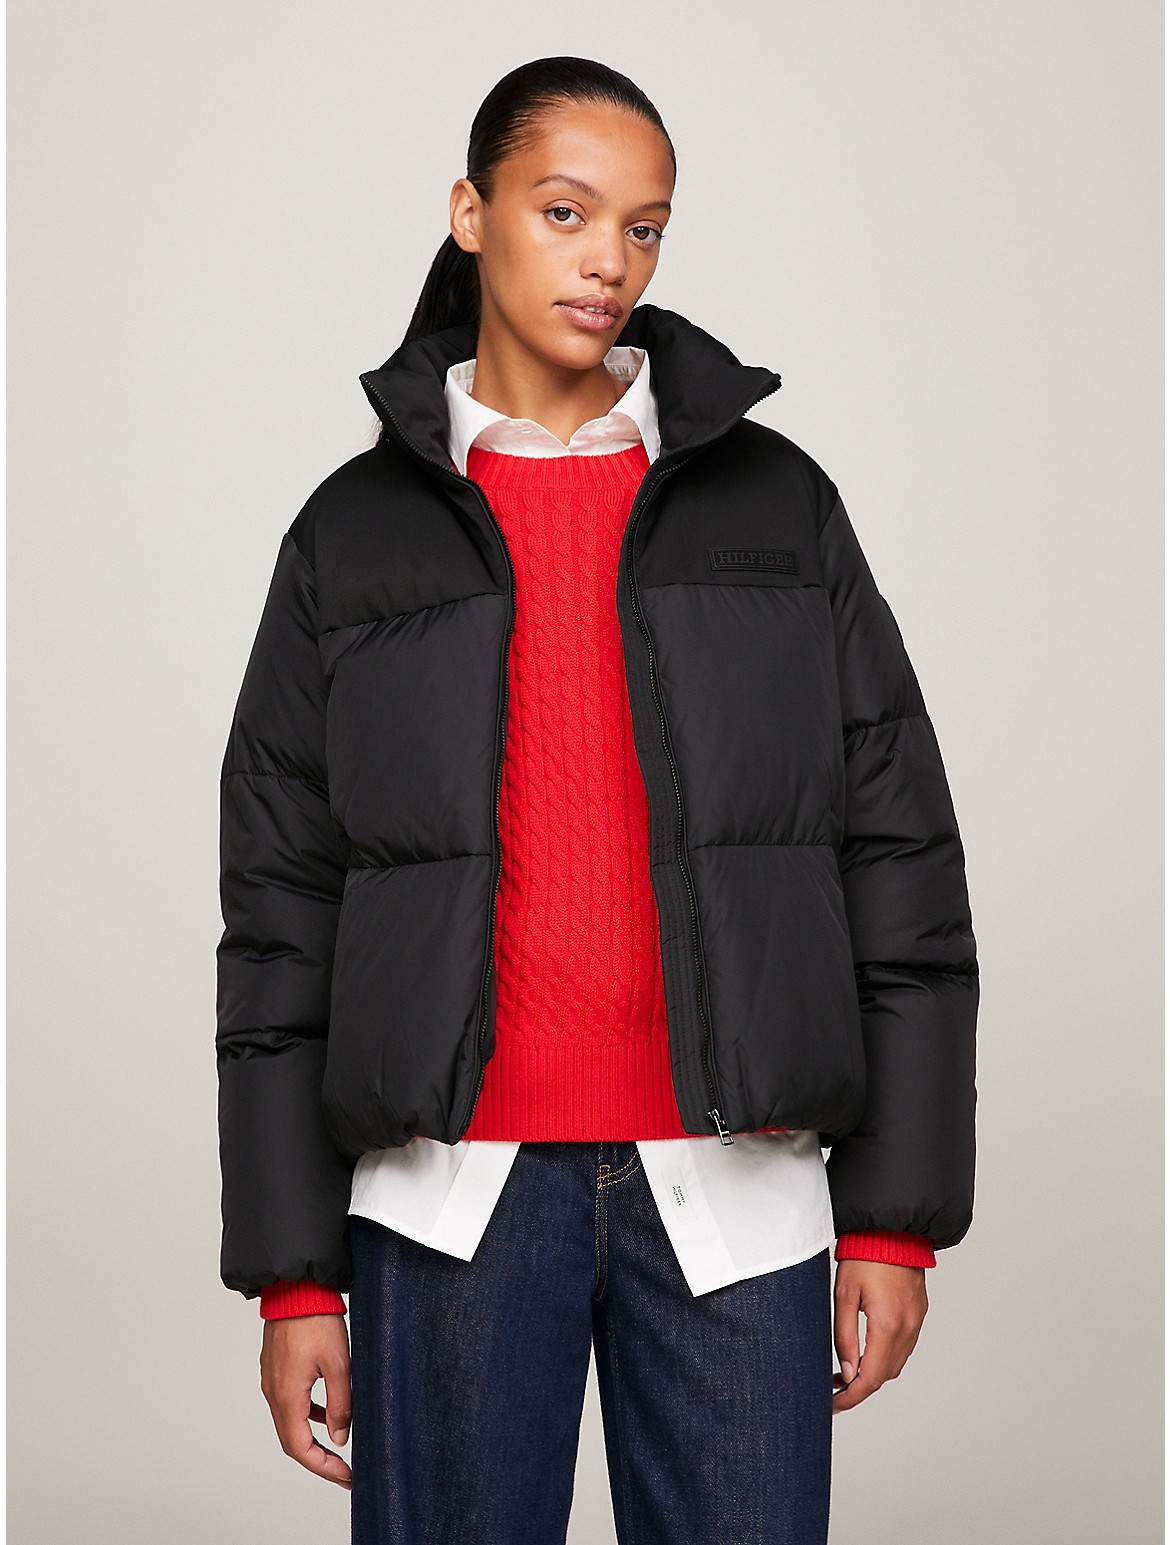 Tommy Hilfiger Women's New York THProtect Puffer Jacket